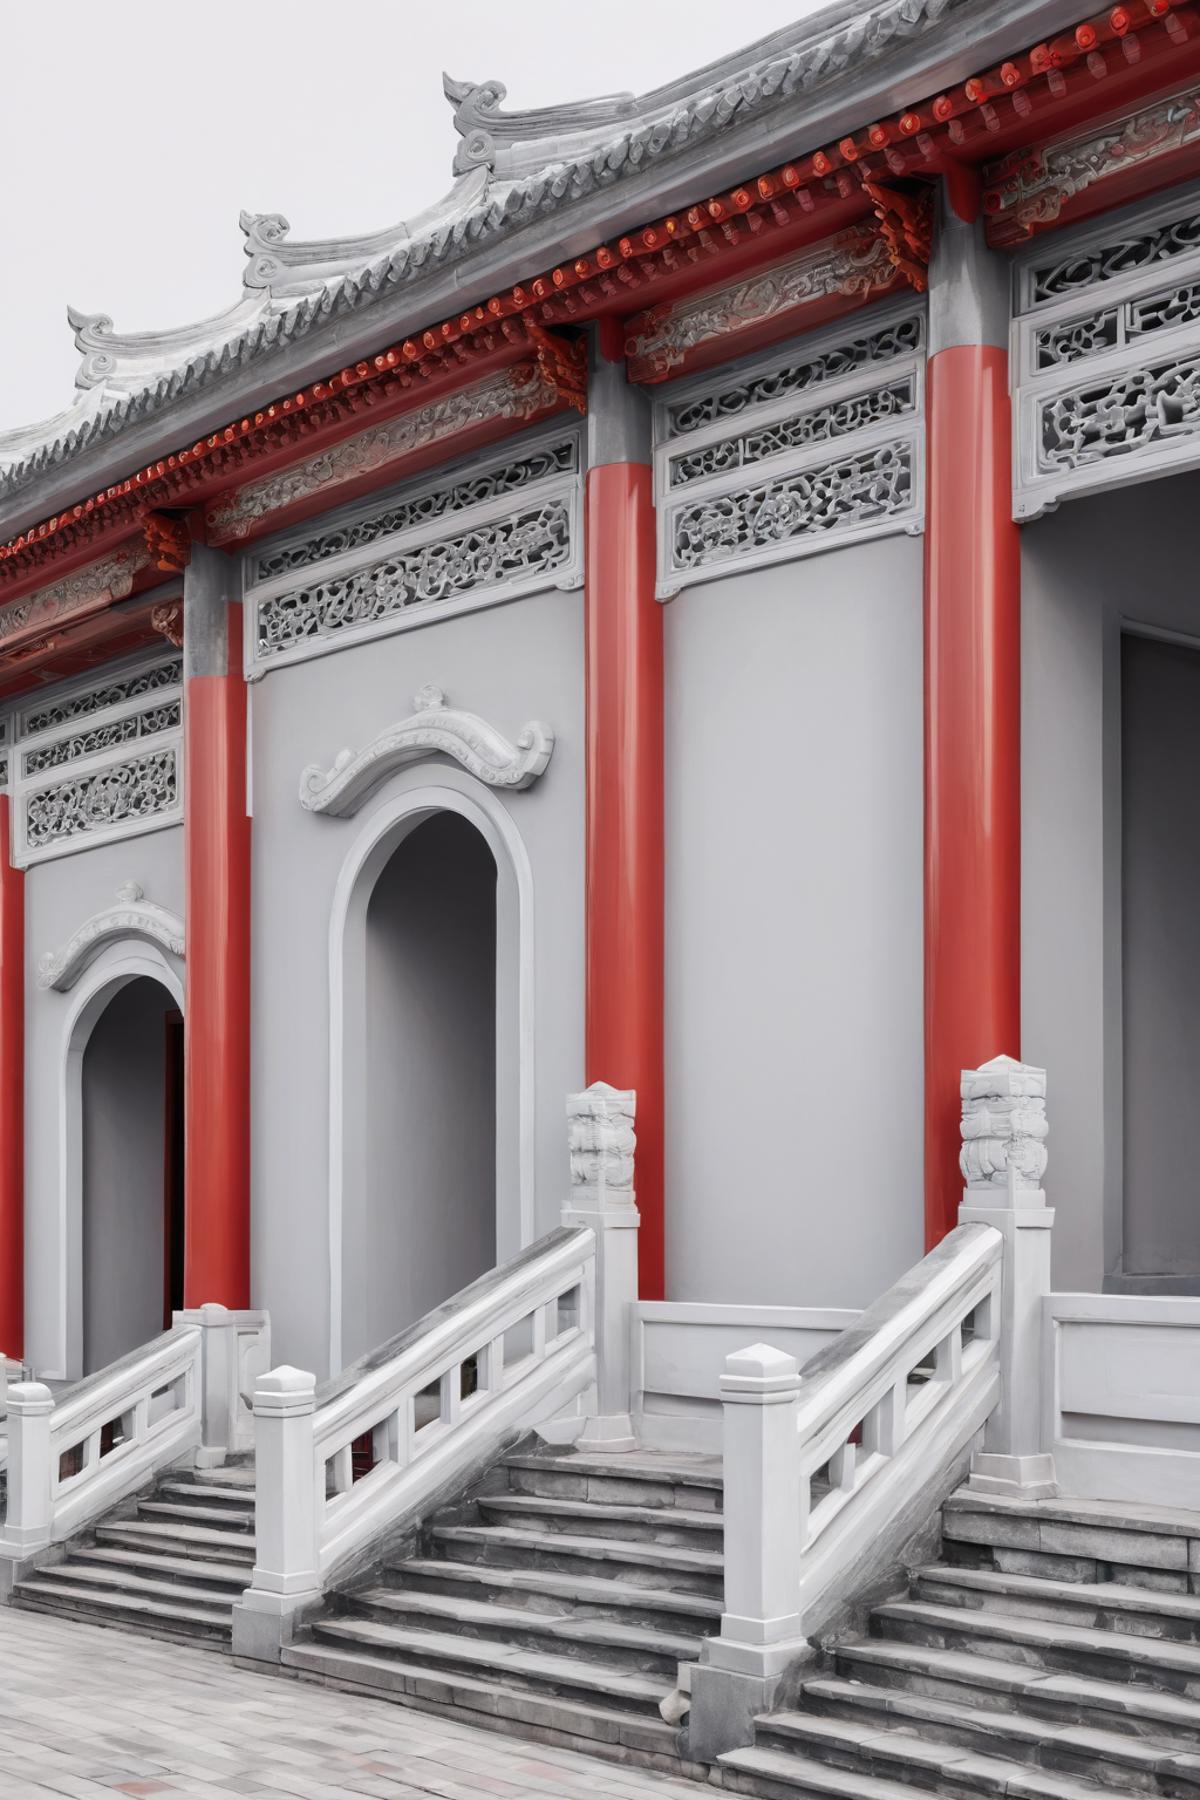 Chinese Traditional Architecture image by CyberBlacat